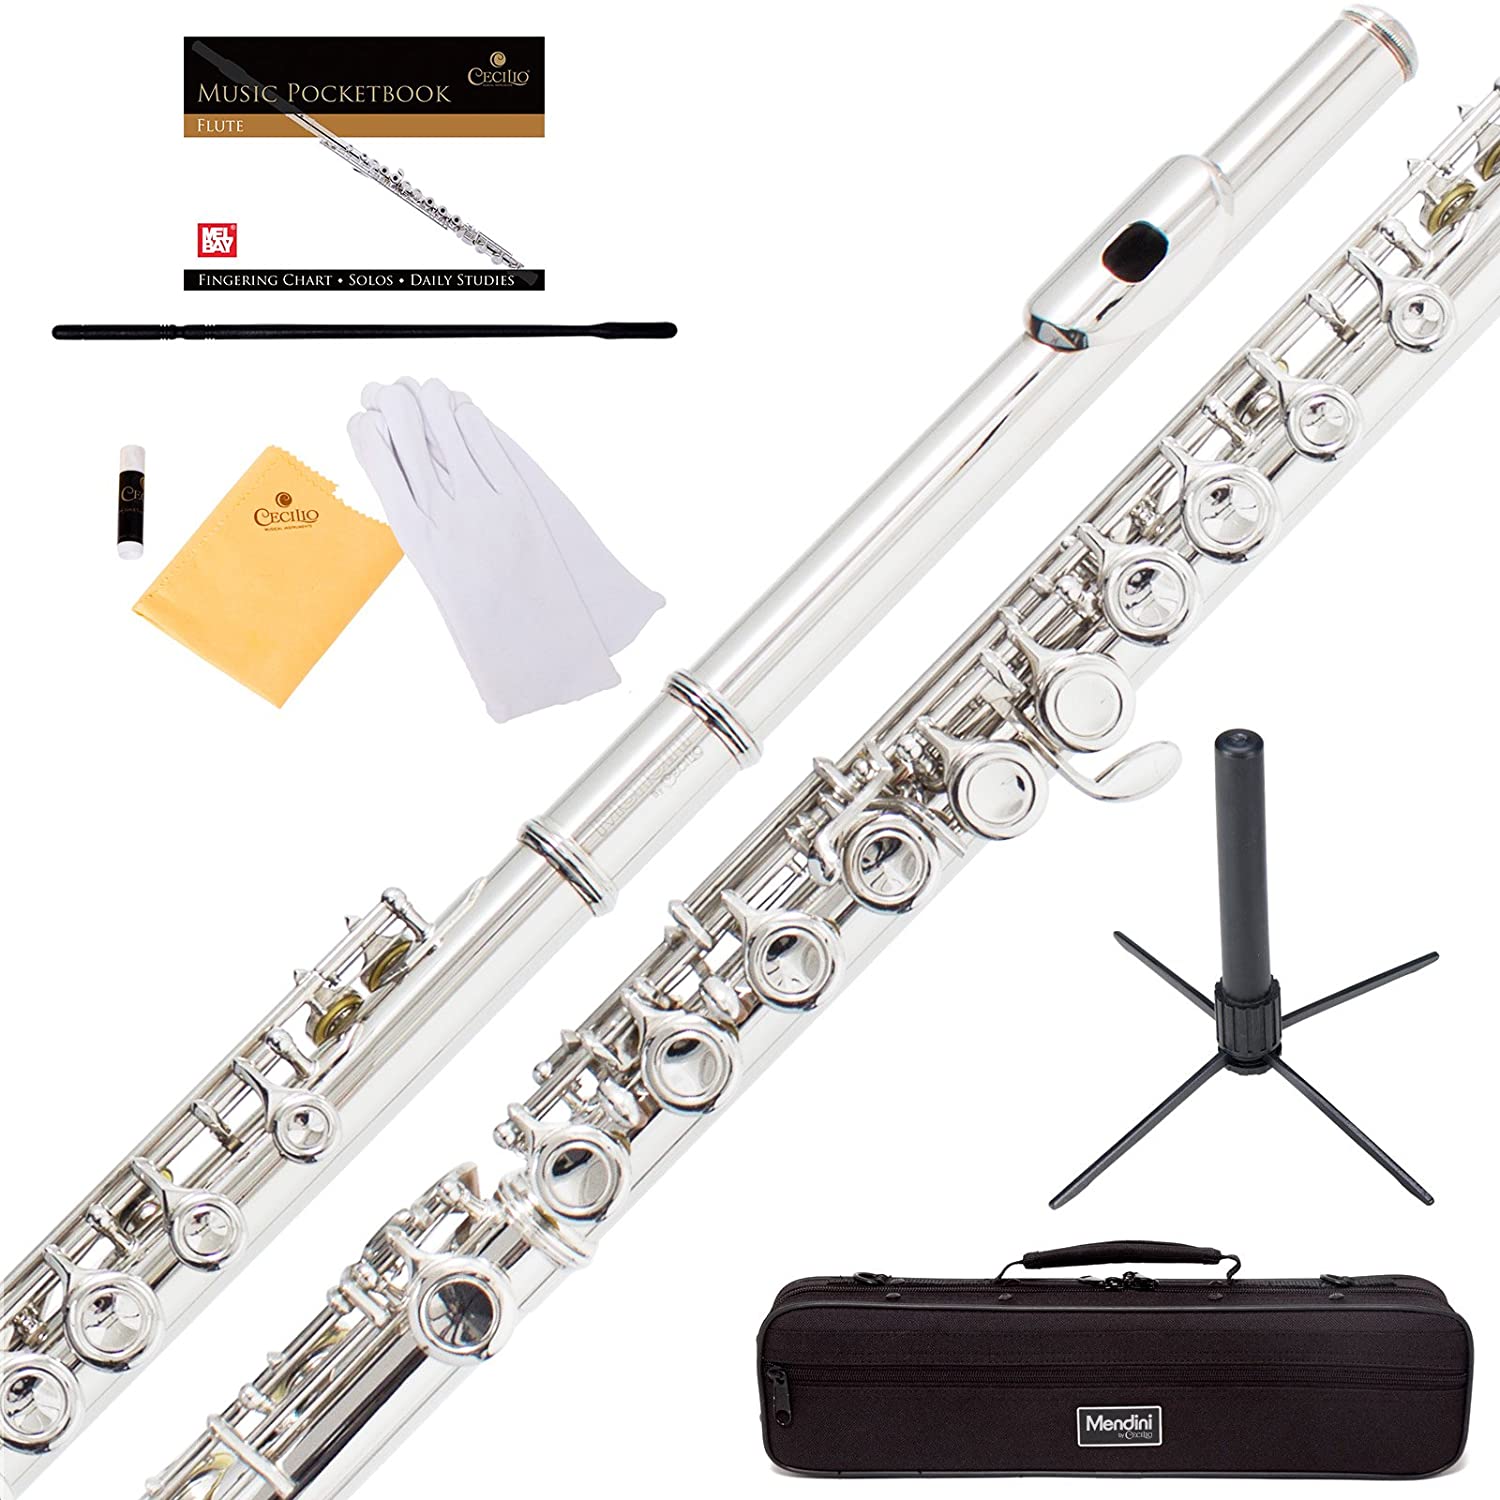 7 Best Kids Flutes 2022 - Buying Guide & Reviews 5